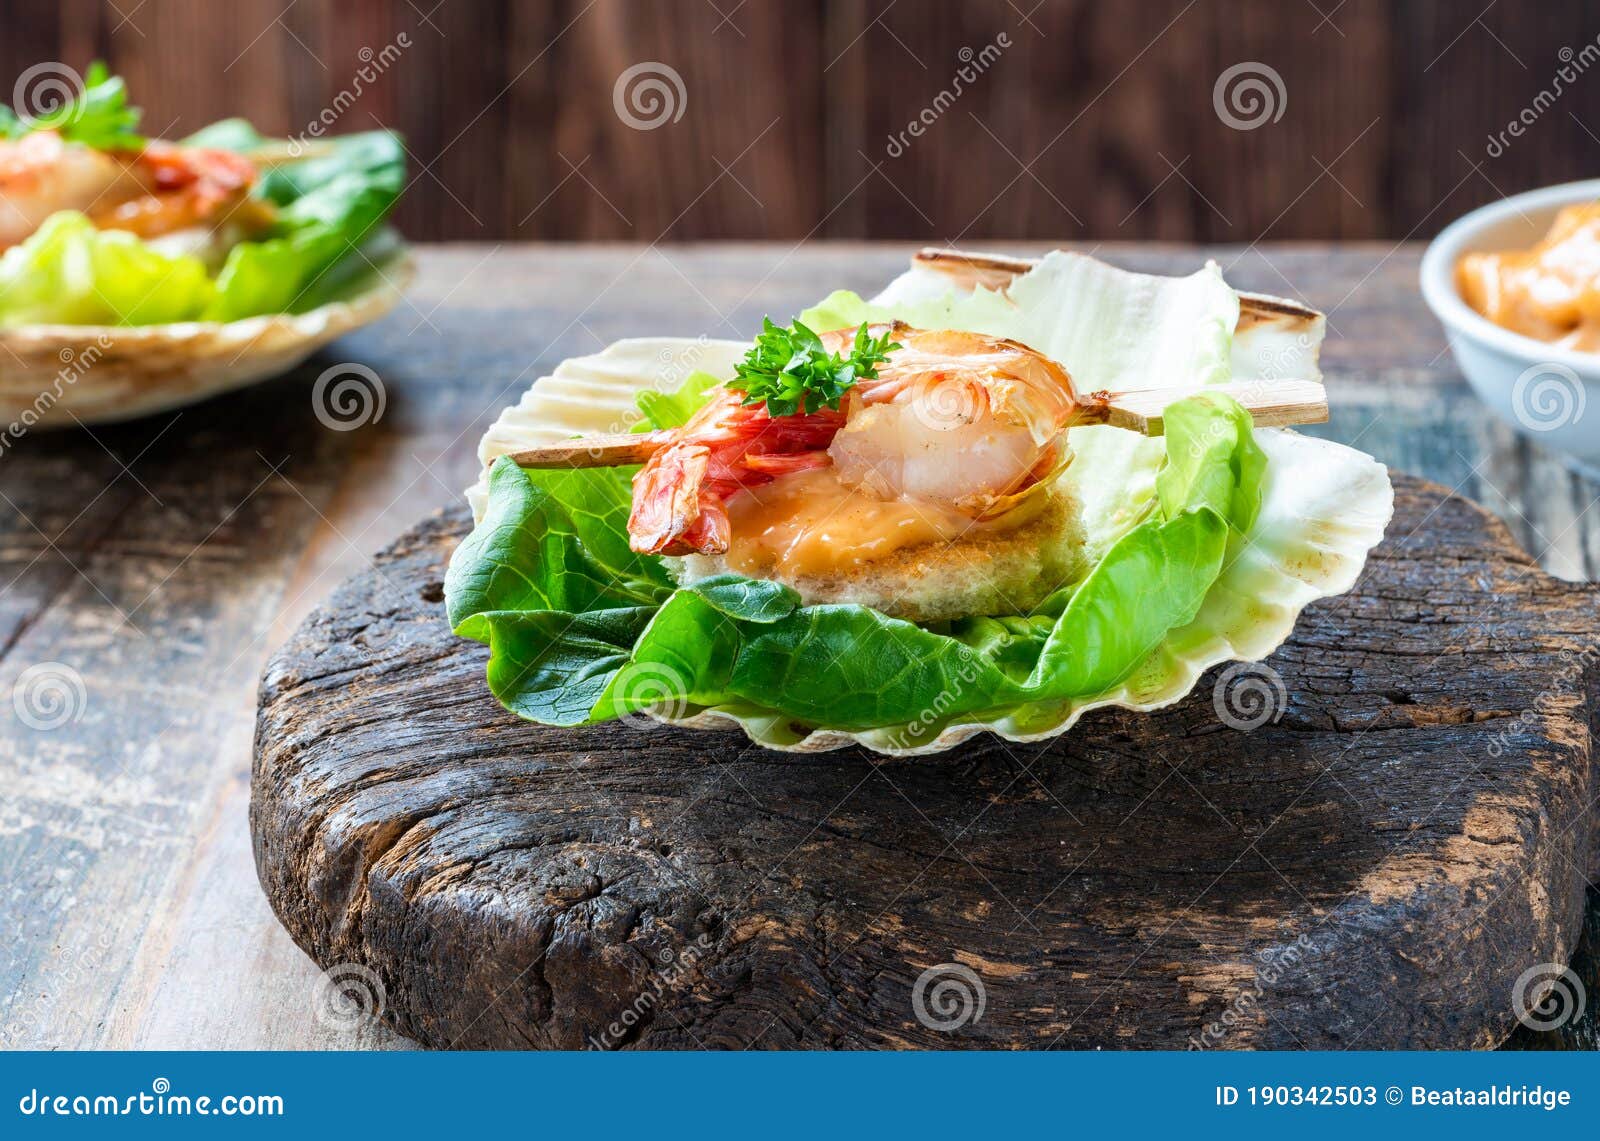 Canapes with Grilled Black Tiger Prawns and Seafood Sauce Stock Image ...